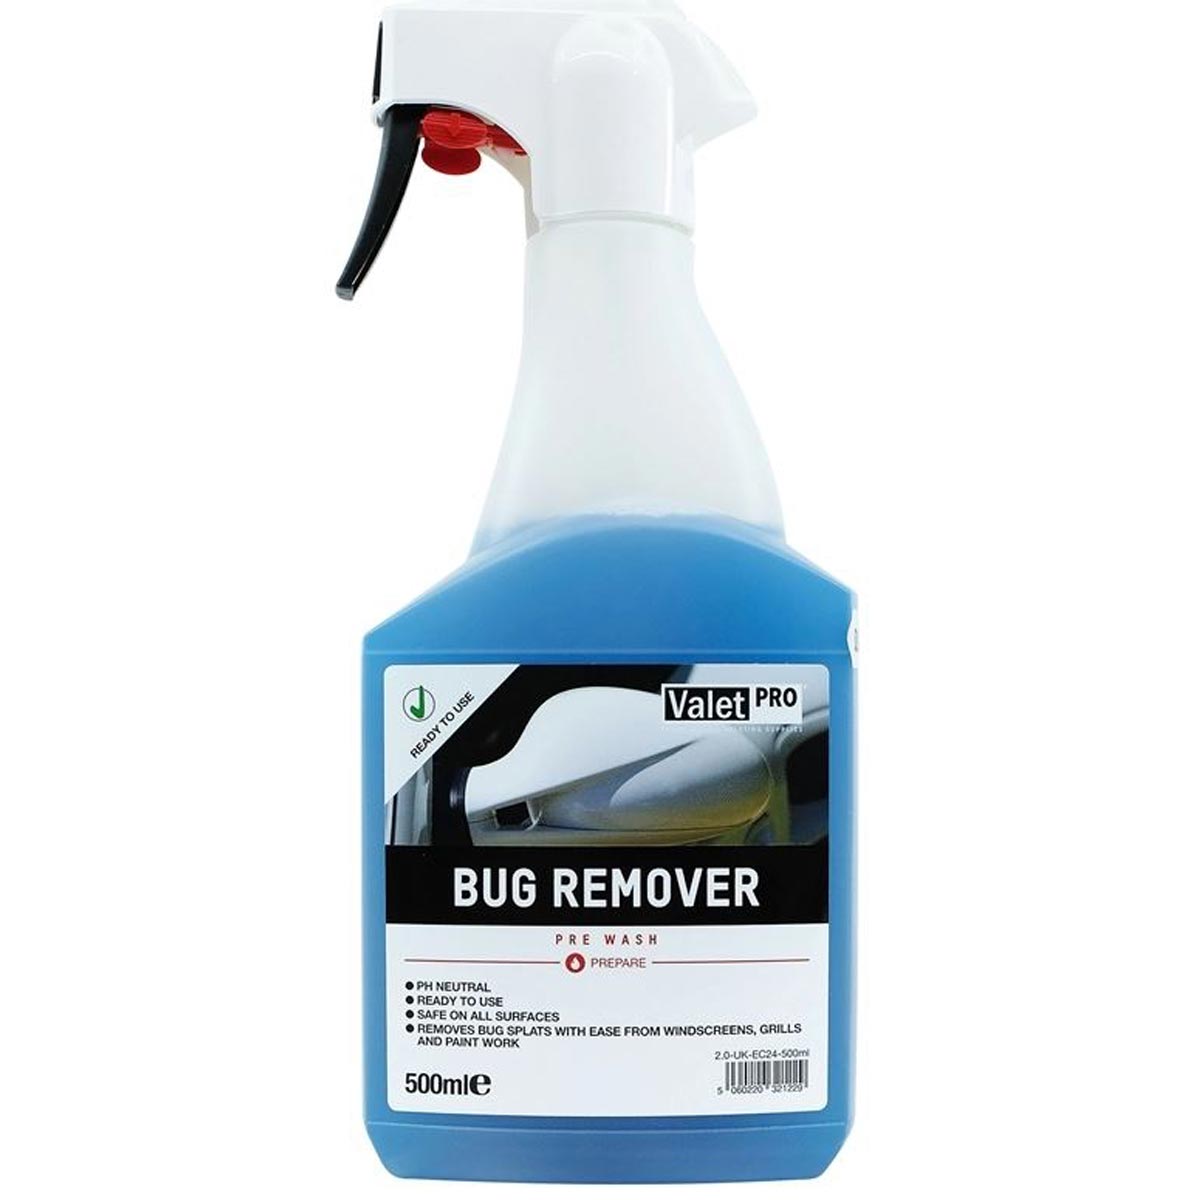 ValetPRO Bug Remover - 500ml ready-to-use